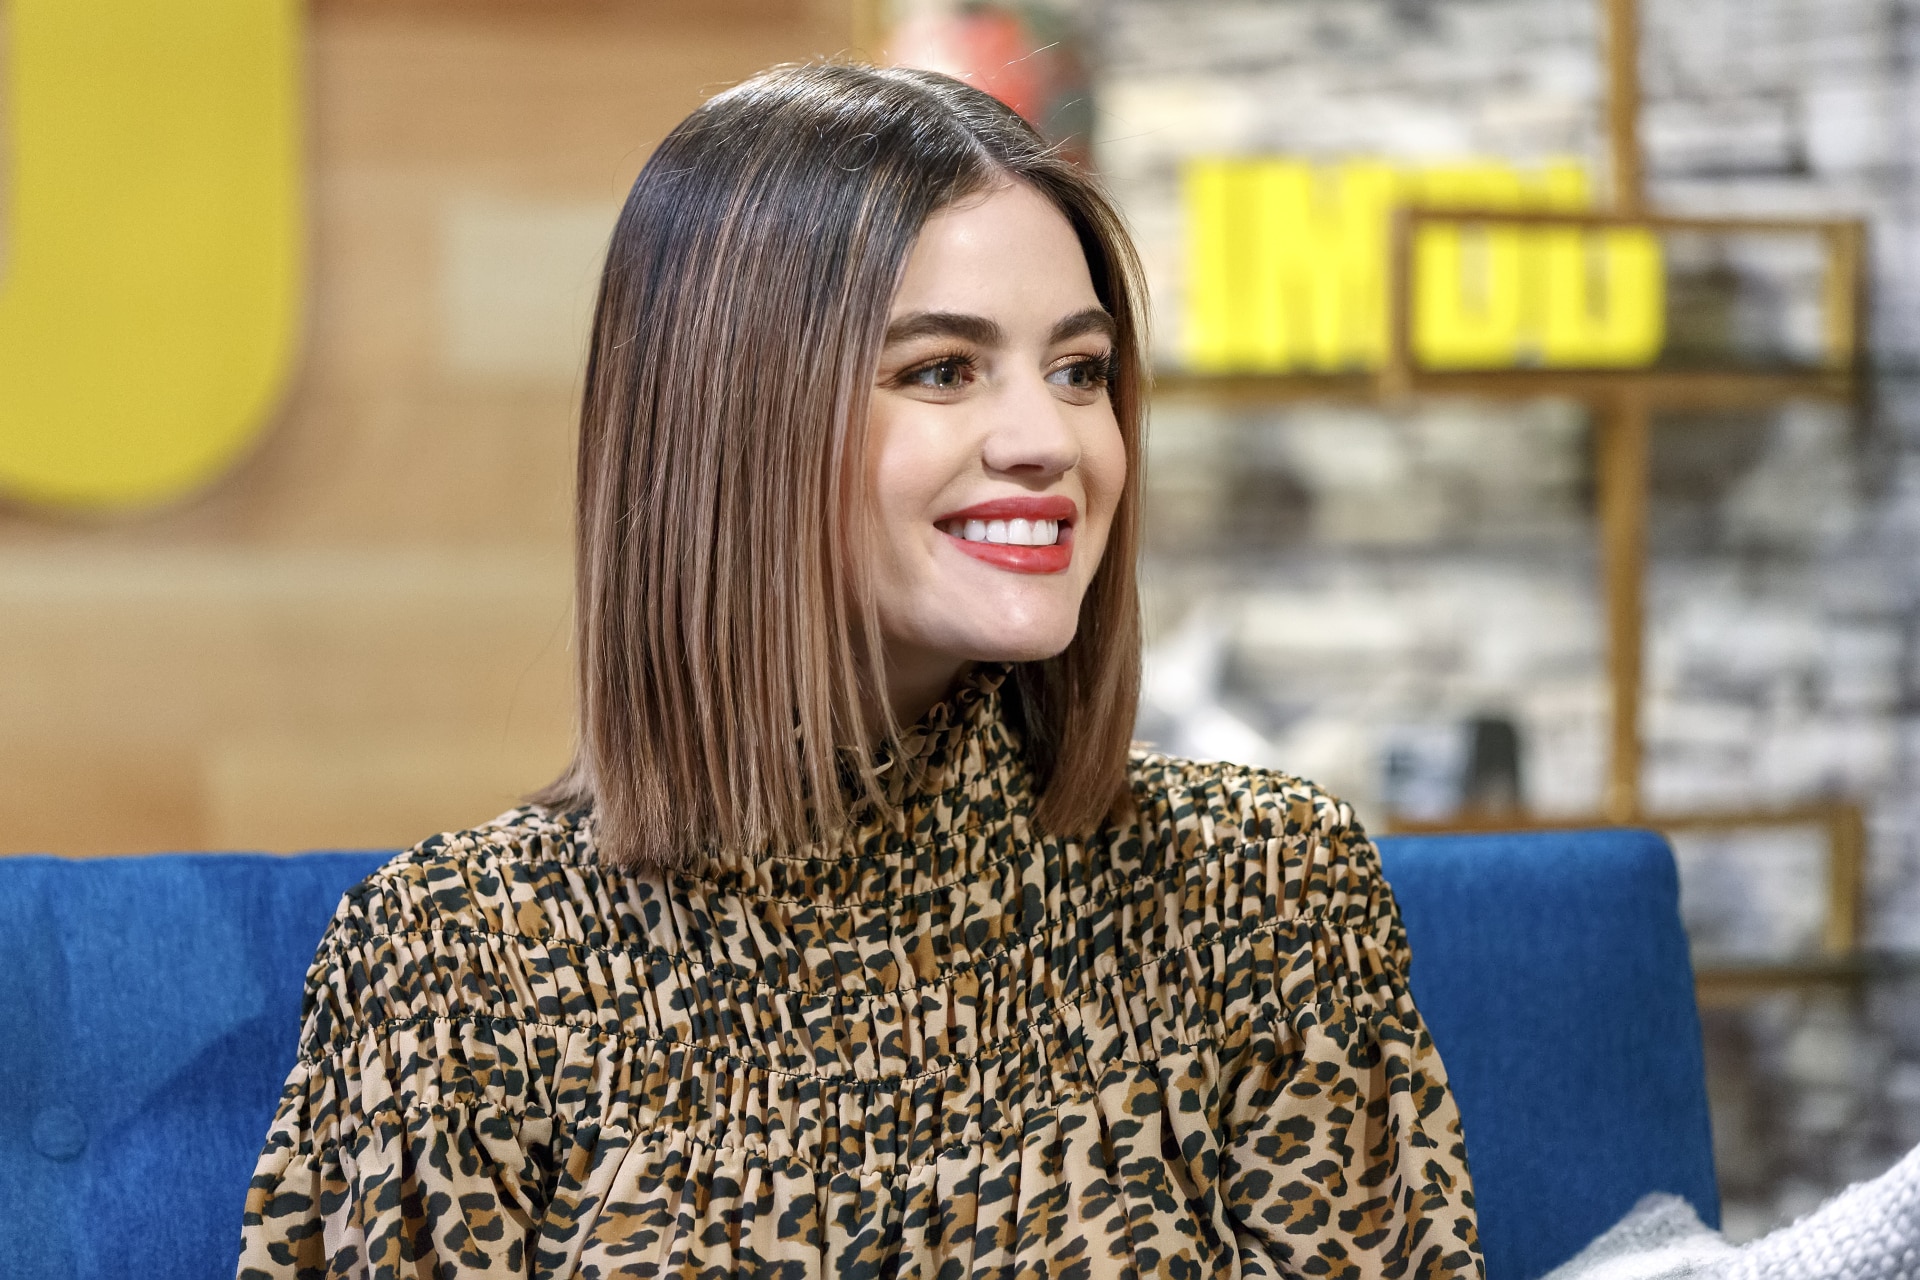 Lucy Hale now has pink hair.